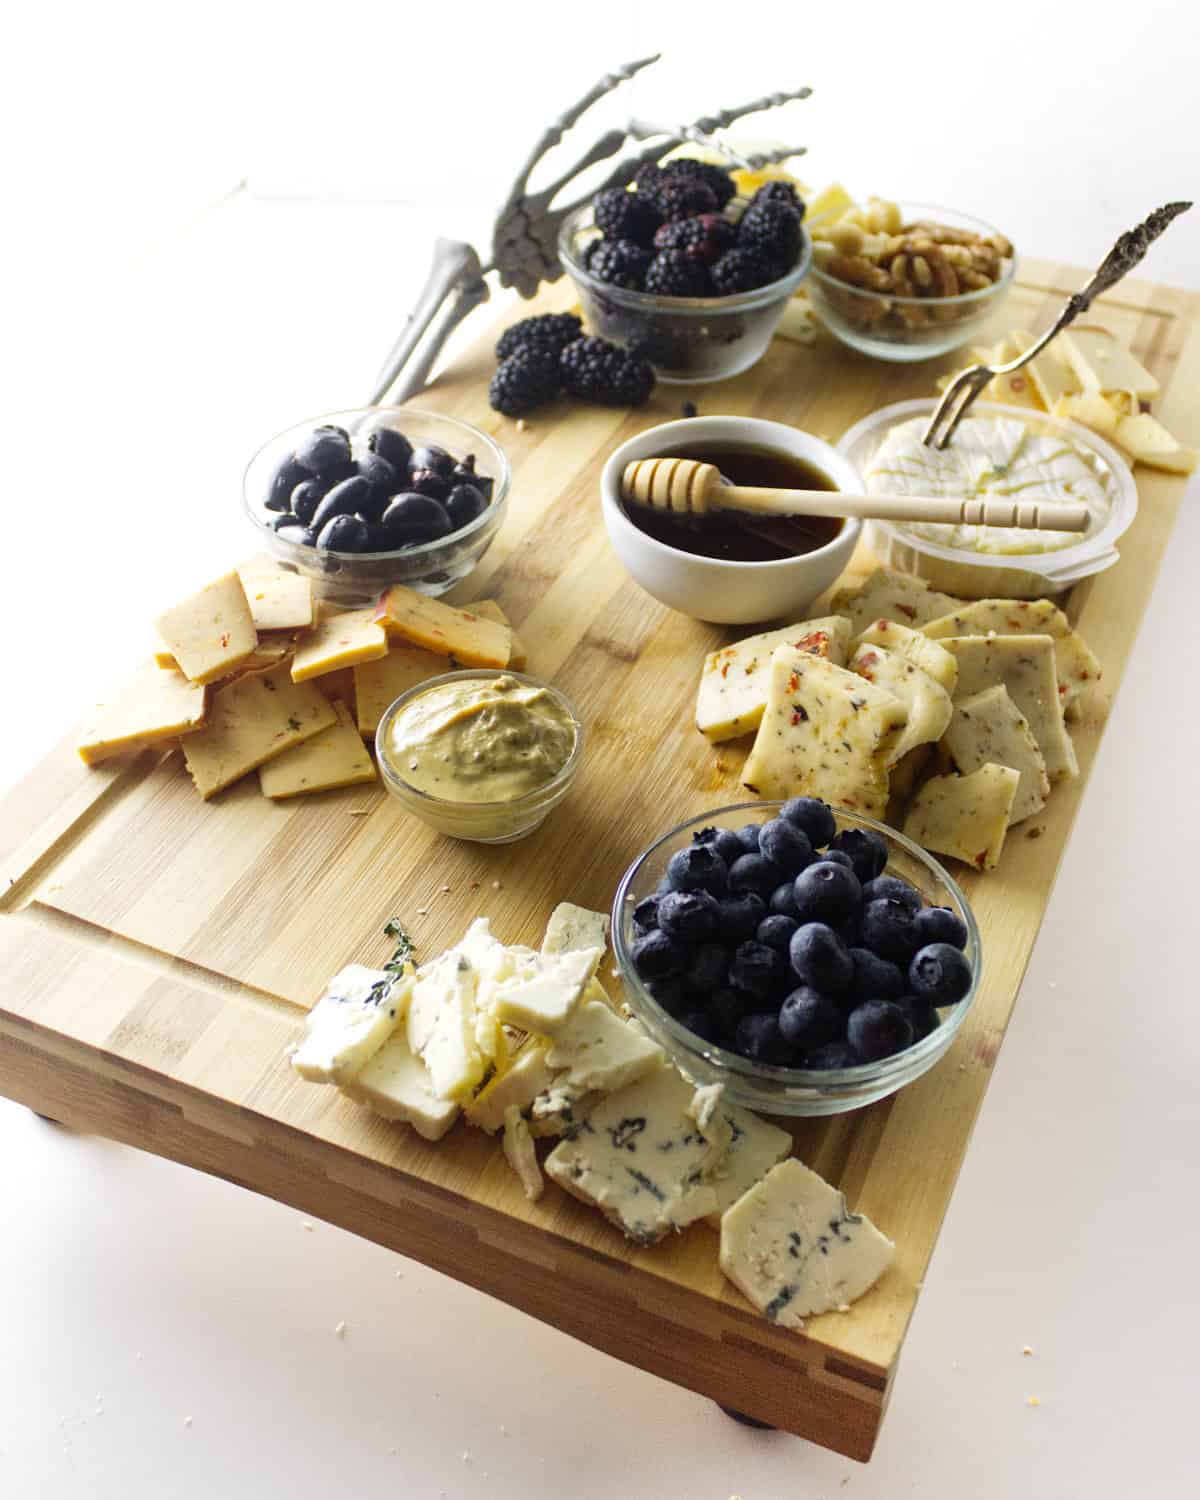 cracker and cheese added to cheese board.